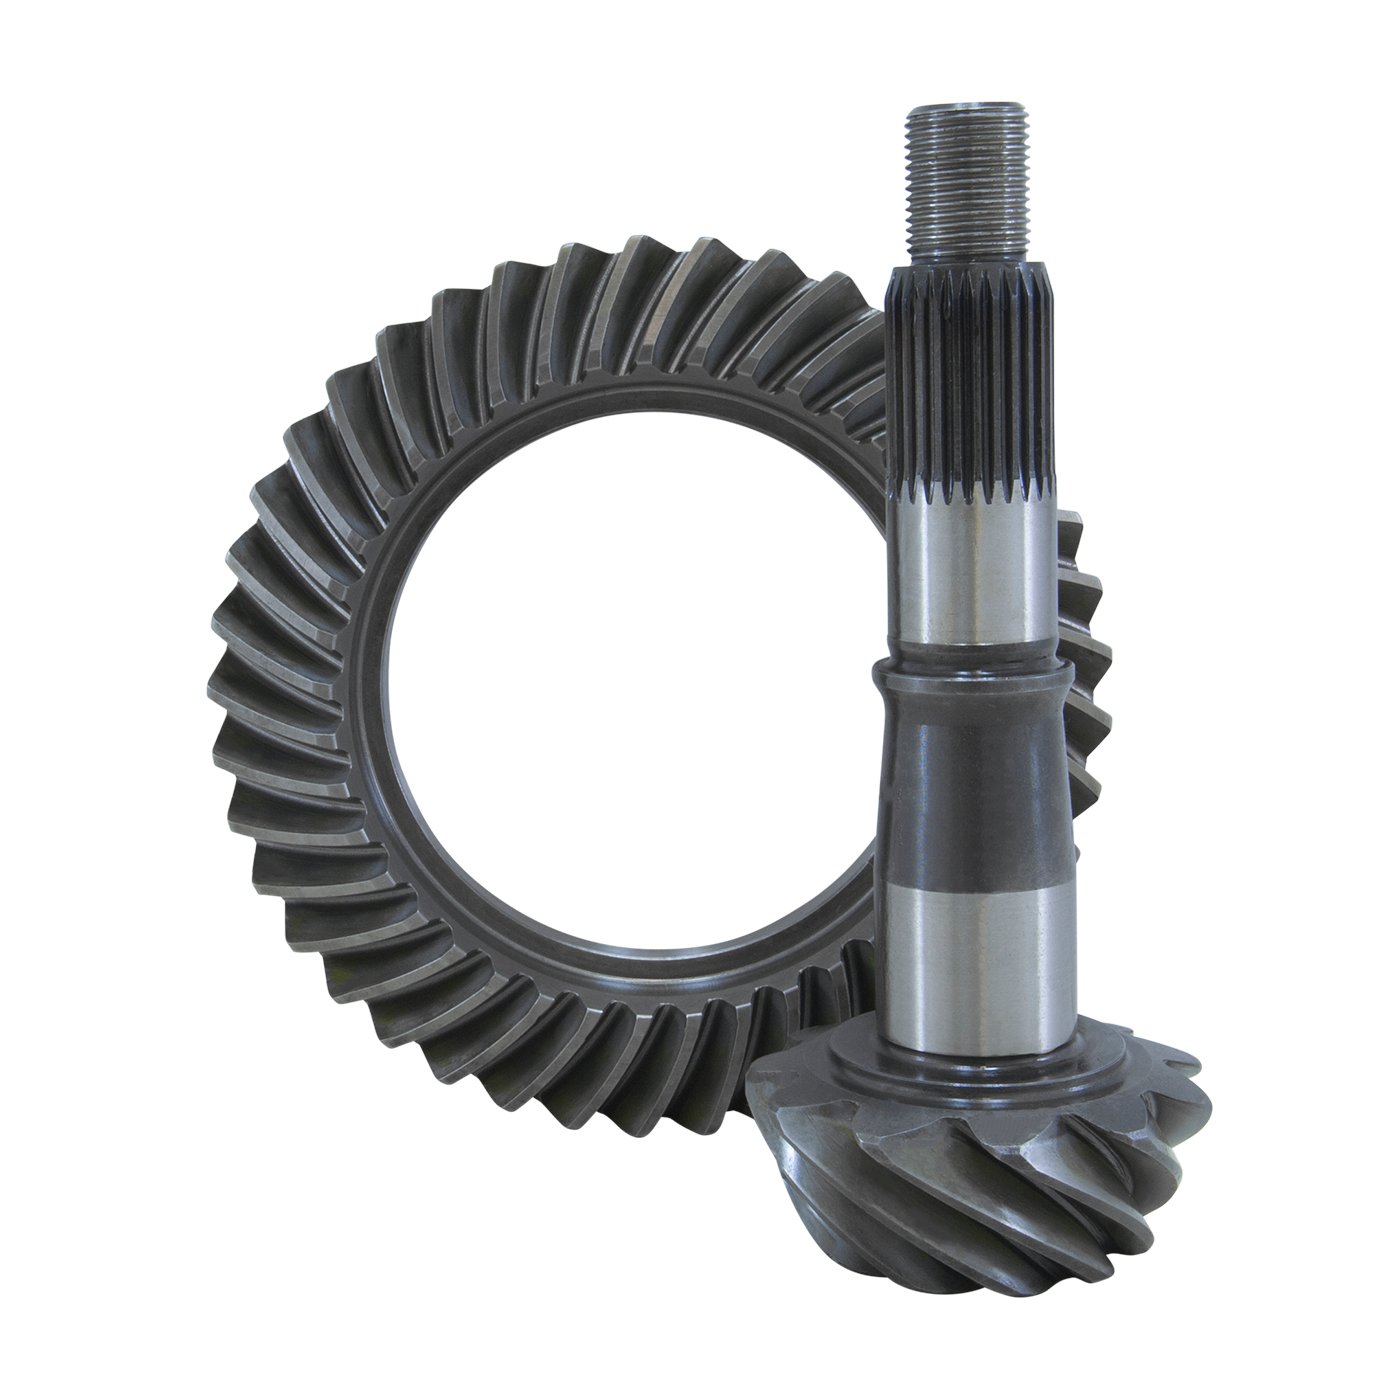 USA Standard ZG GM7.5-273 Ring & Pinion Gear Set, For GM 7.5 in., 2.73 Ratio